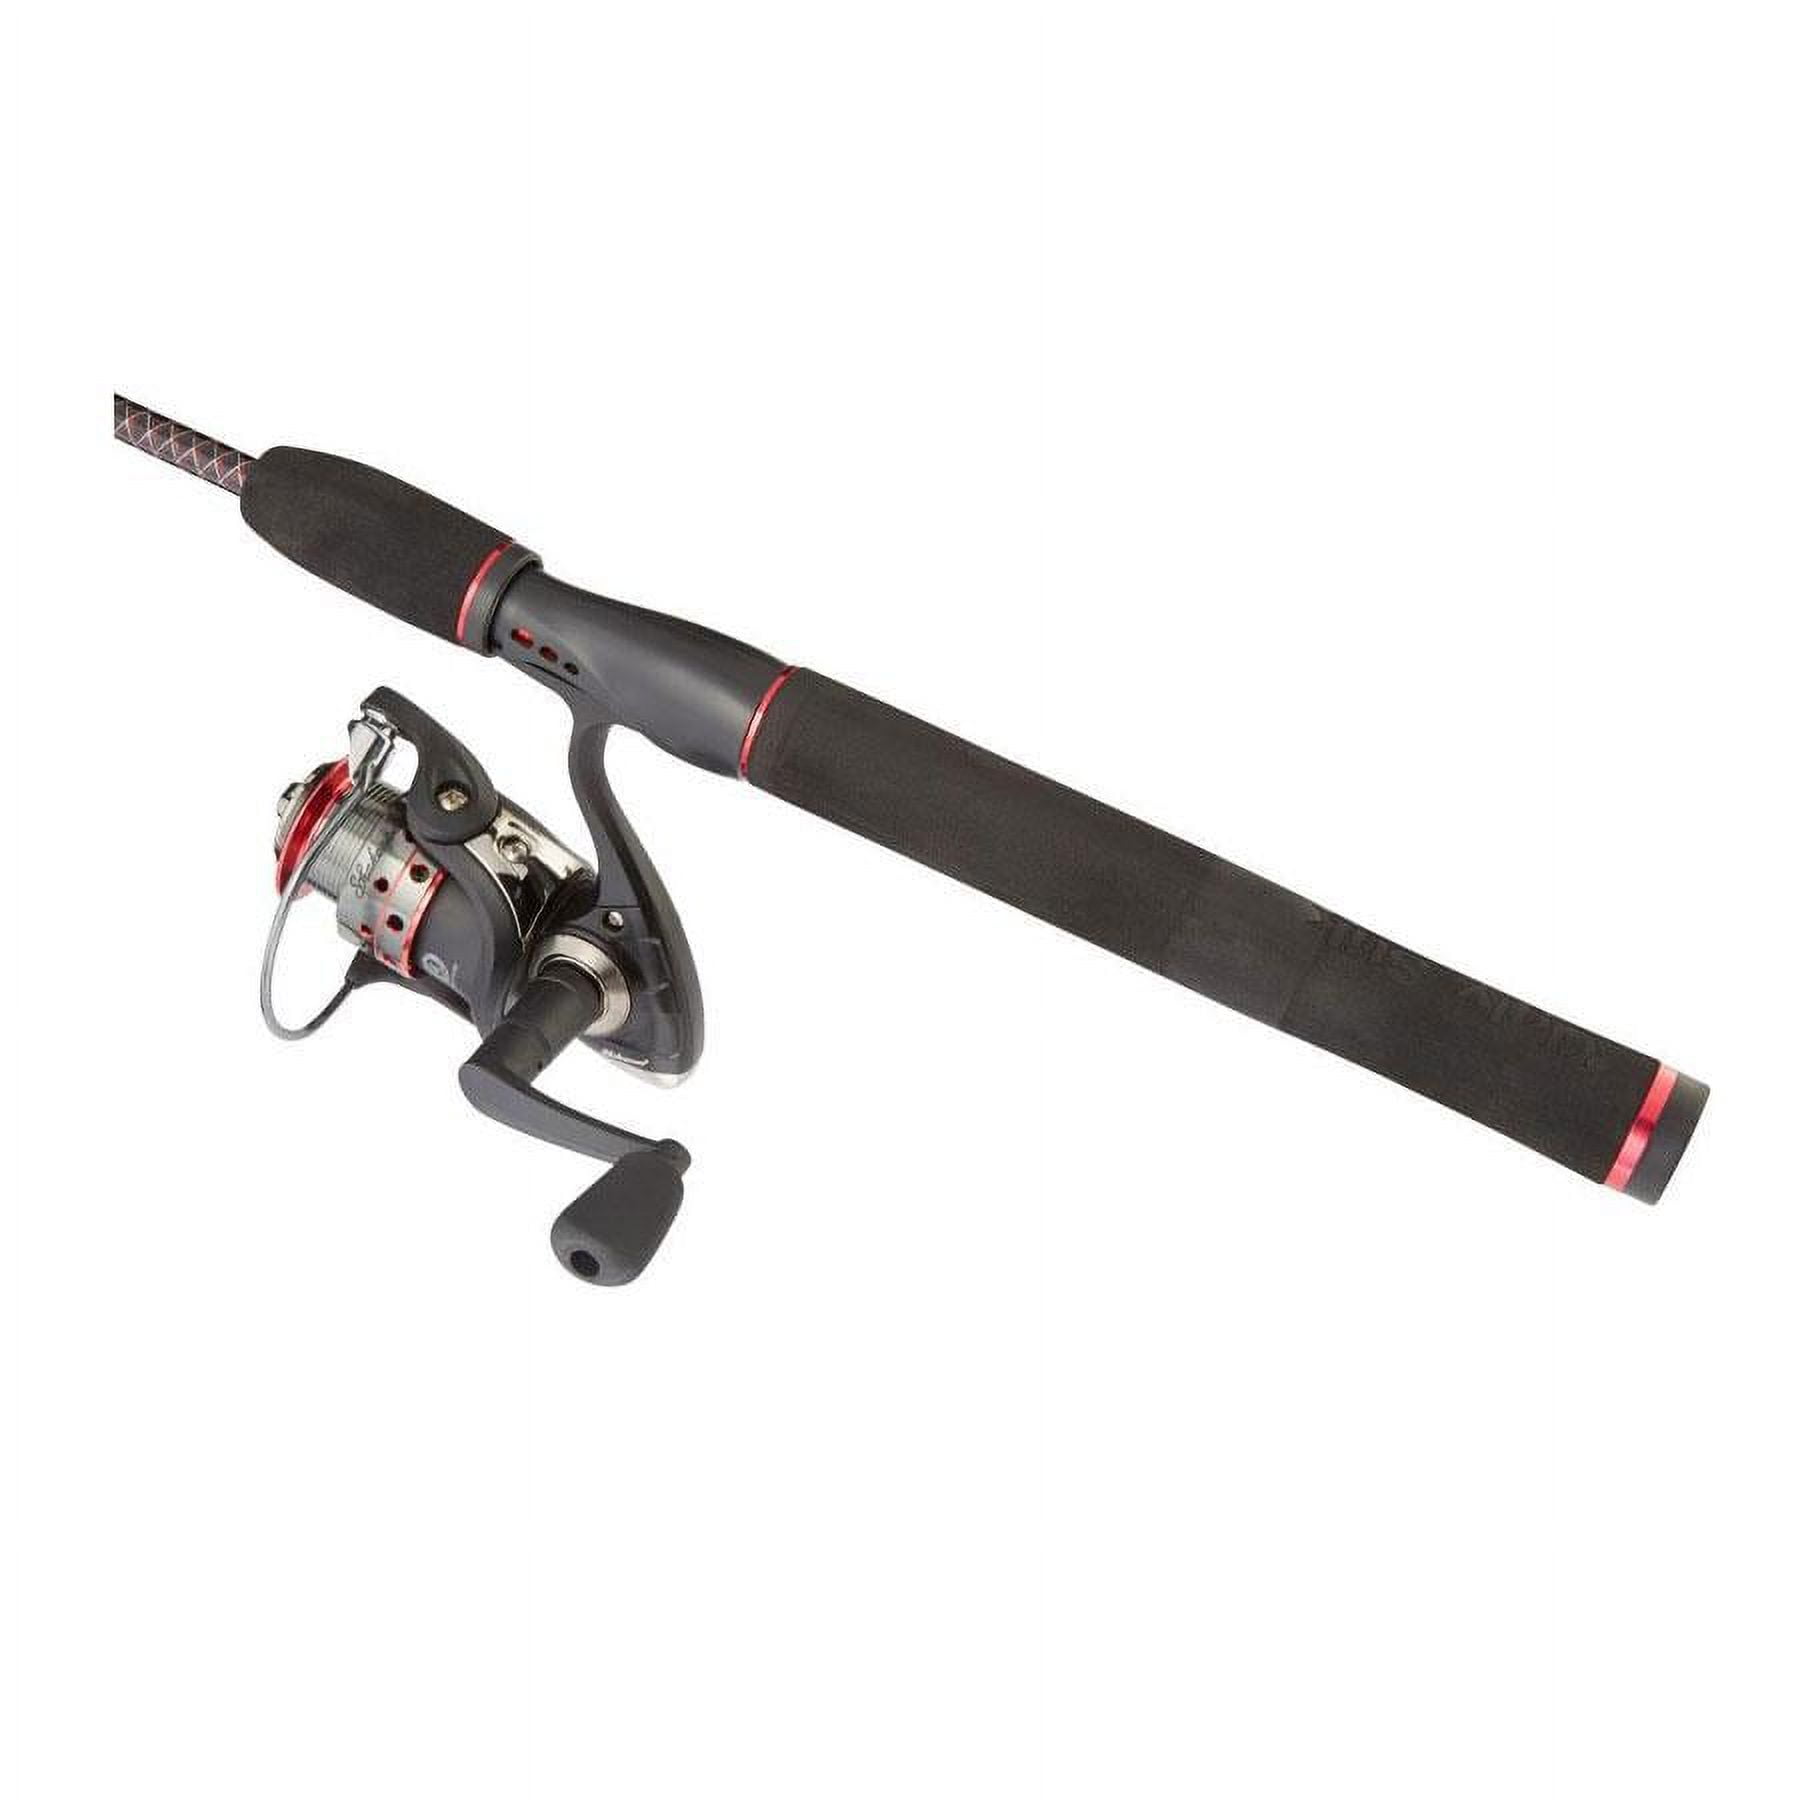 Ugly Stik 6’ GX2 Spinning Fishing Rod and Reel Spinning Combo